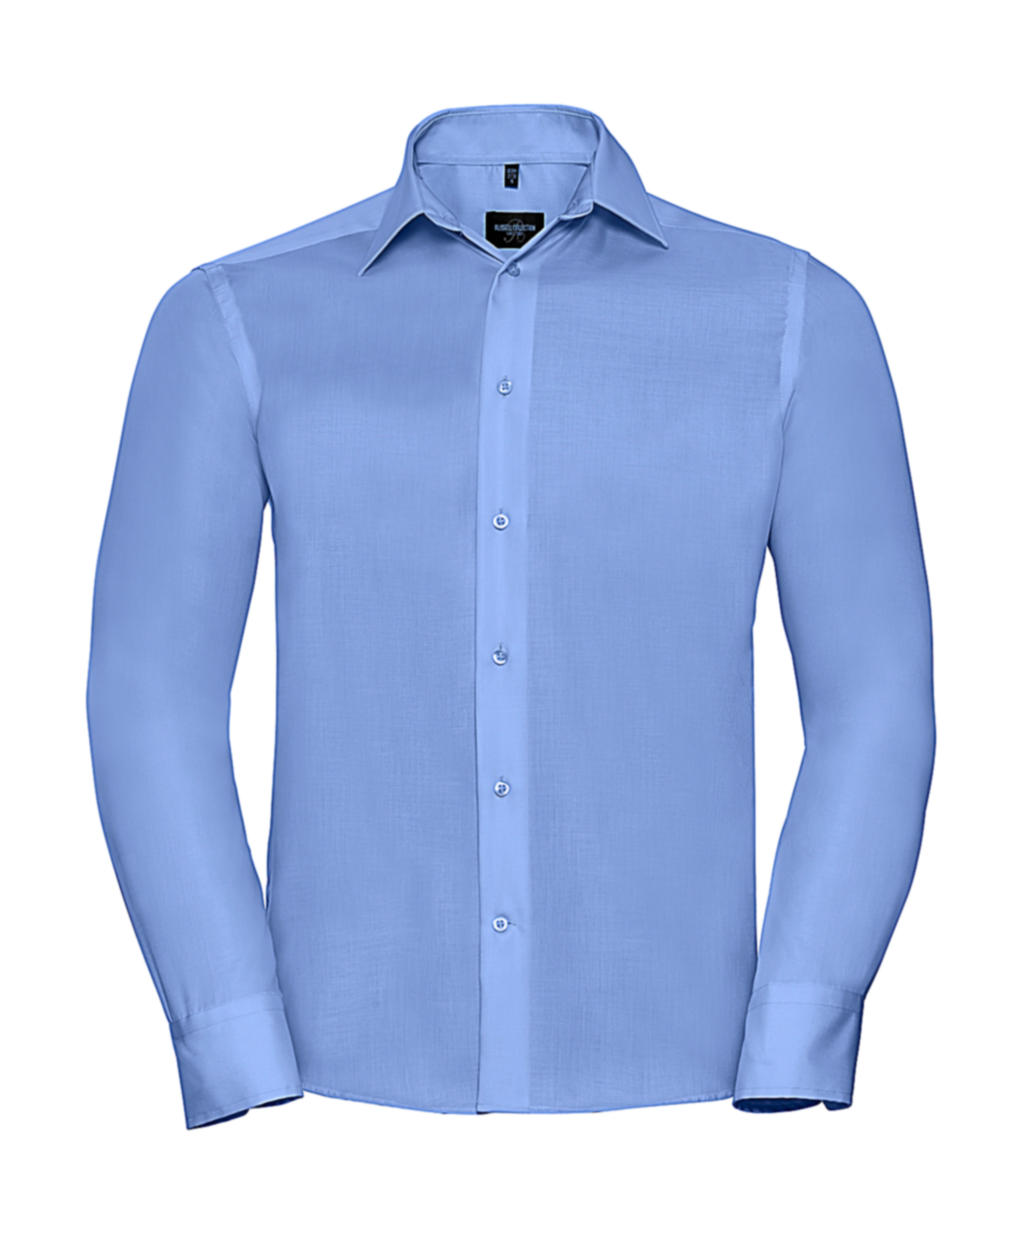  Tailored Ultimate Non-iron Shirt LS in Farbe Bright Sky